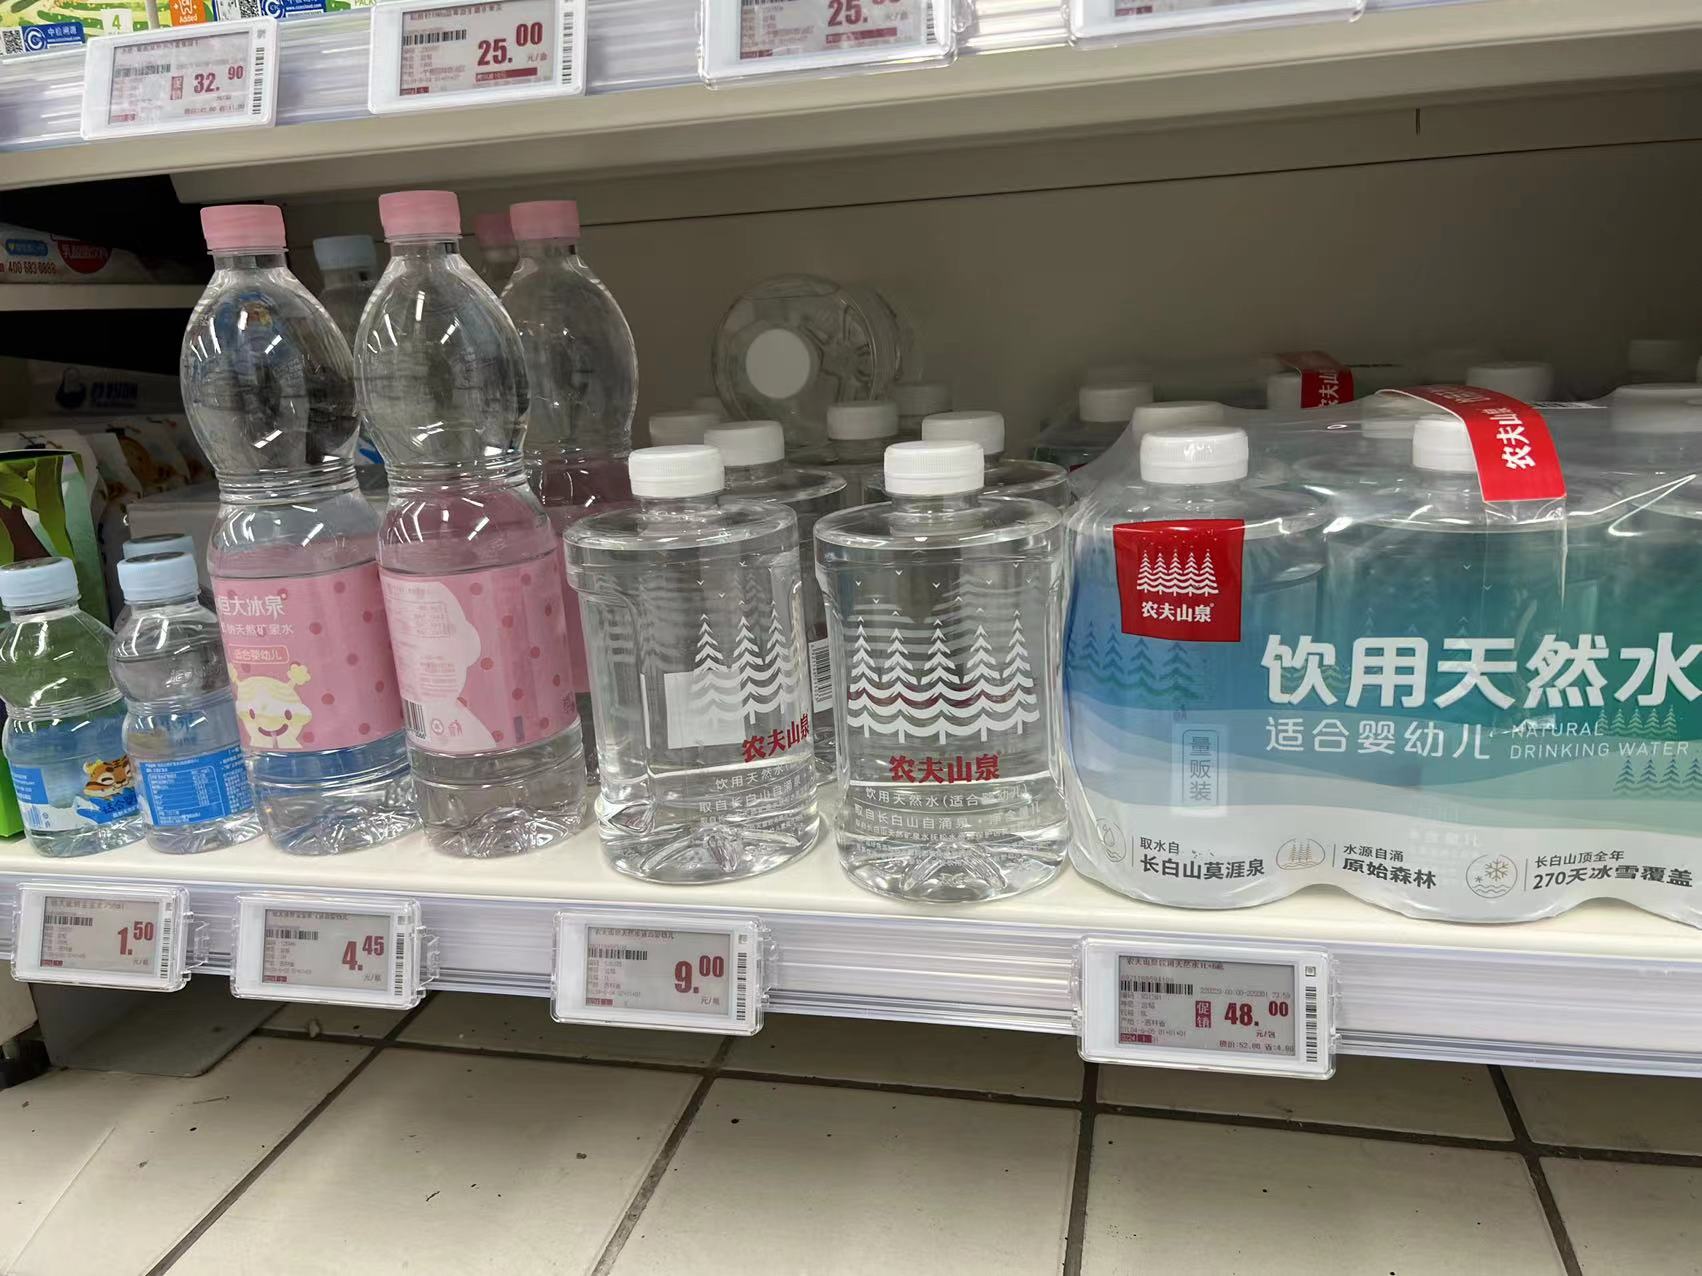 Packaged drinking water for infants sold on supermarket shelves. Sun Yanming/photo